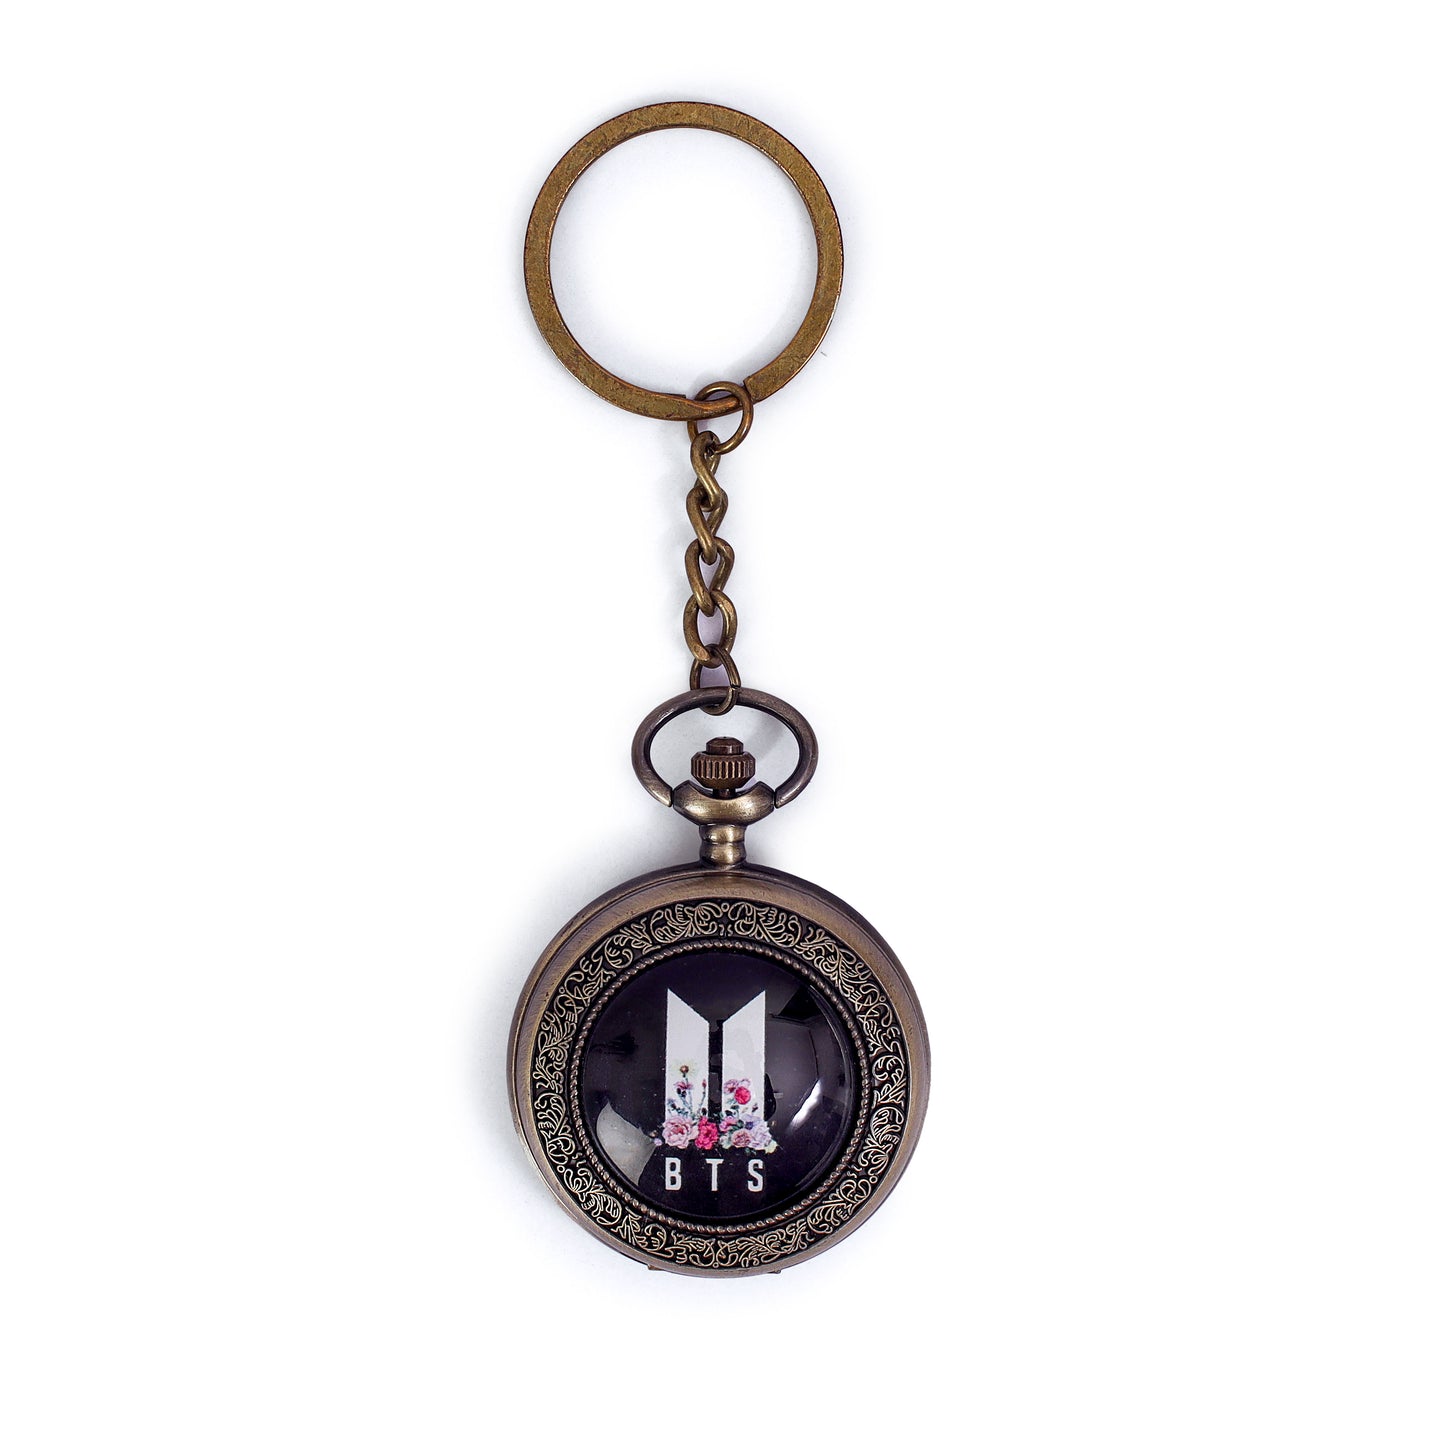 BTS Beats Key to the Rhythm Unlock the Harmony with this Vintage Pocket Watch